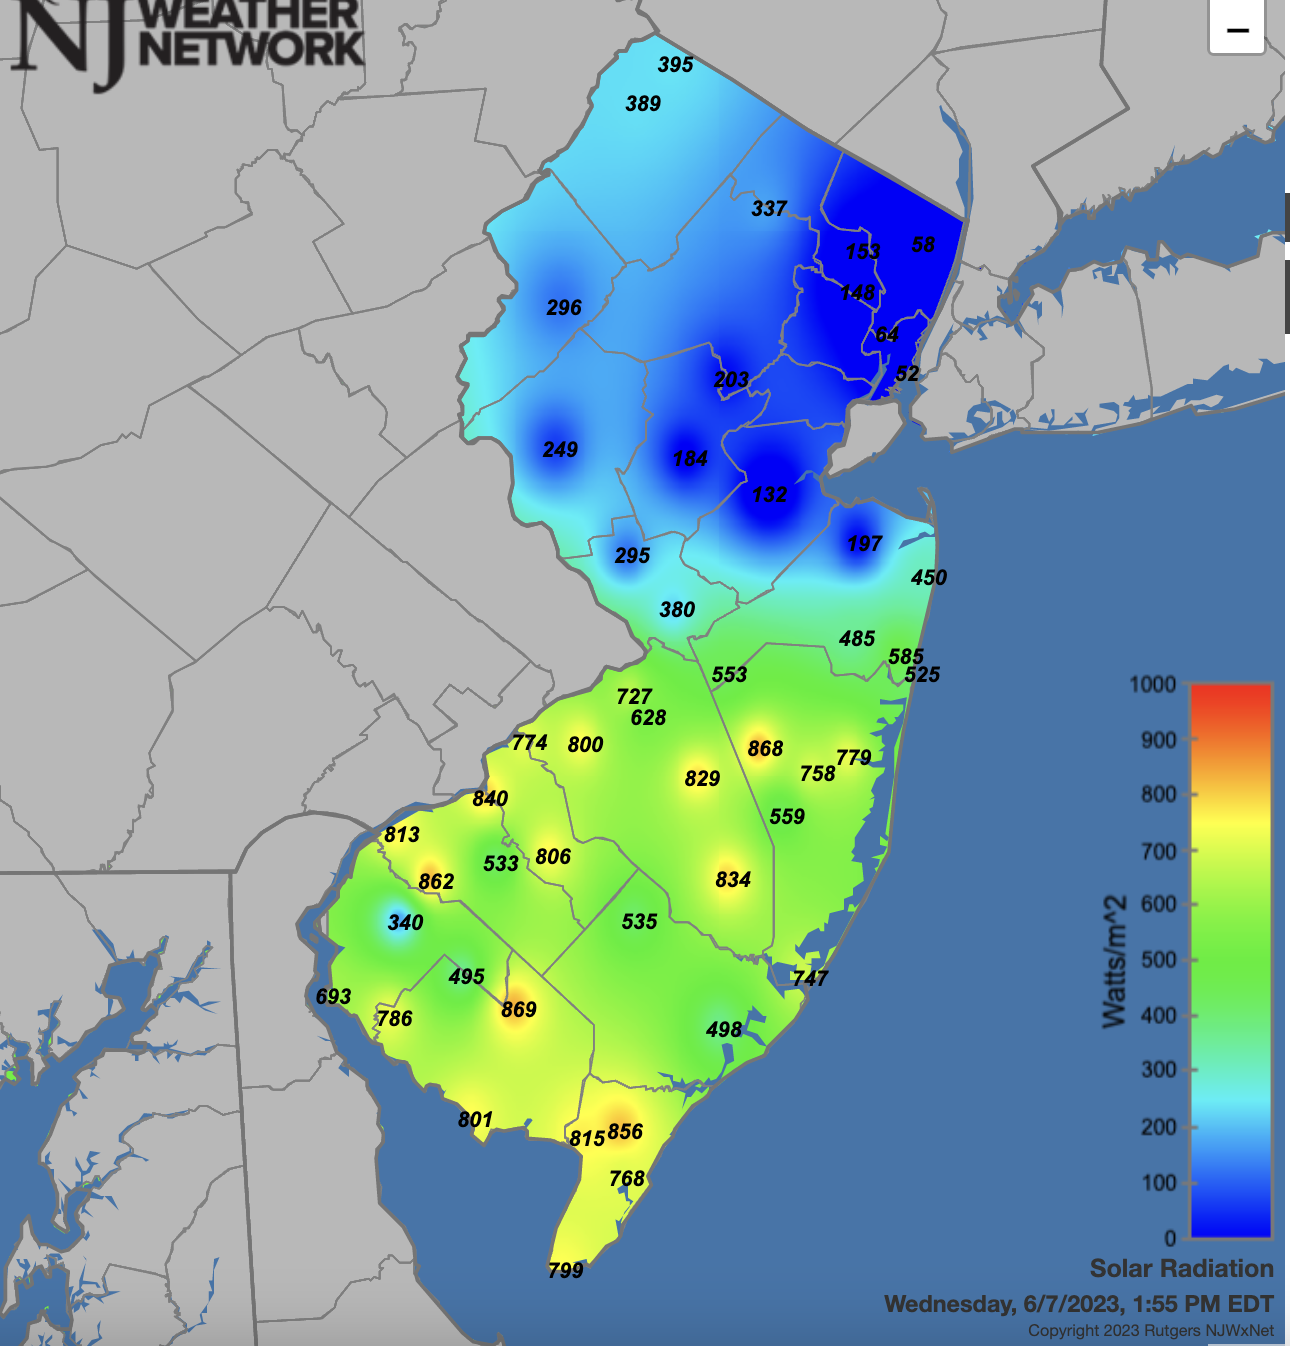 Solar radiation observed at NJWxNet stations at 1:55 PM on June 7th.